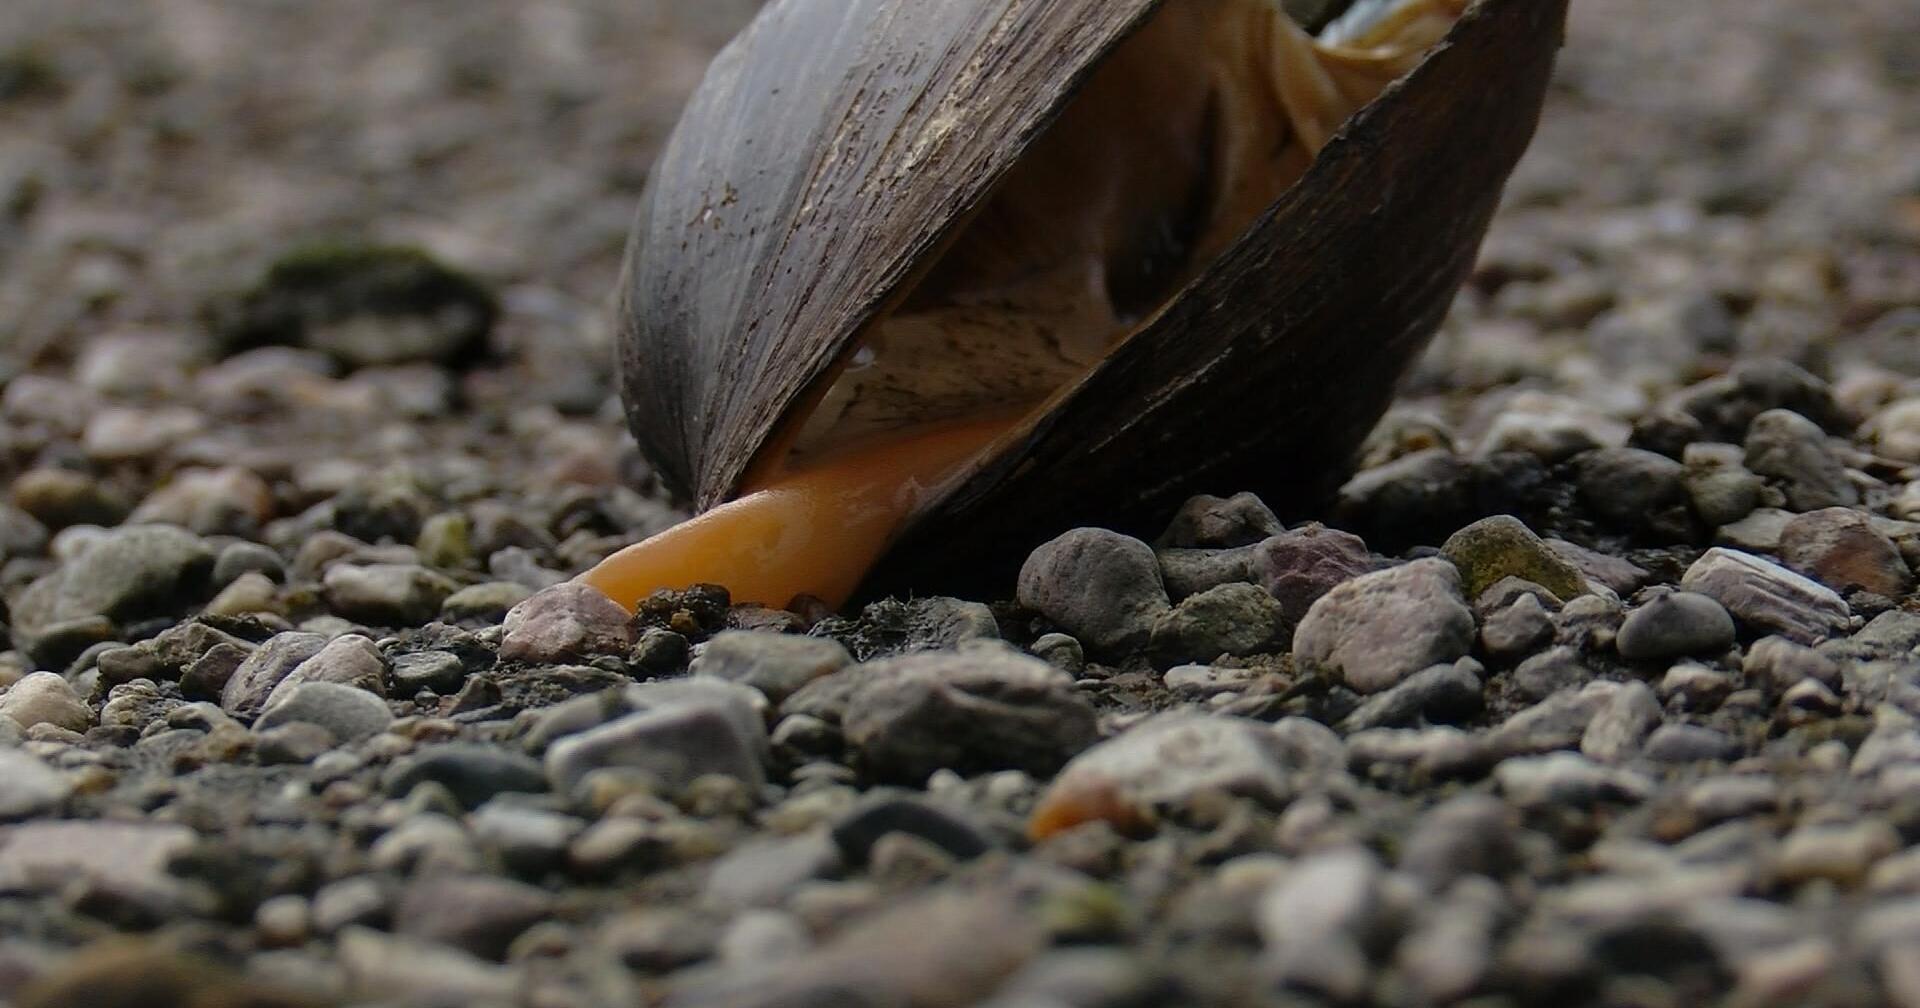 Wildlife Snails, Slugs, and Mussels